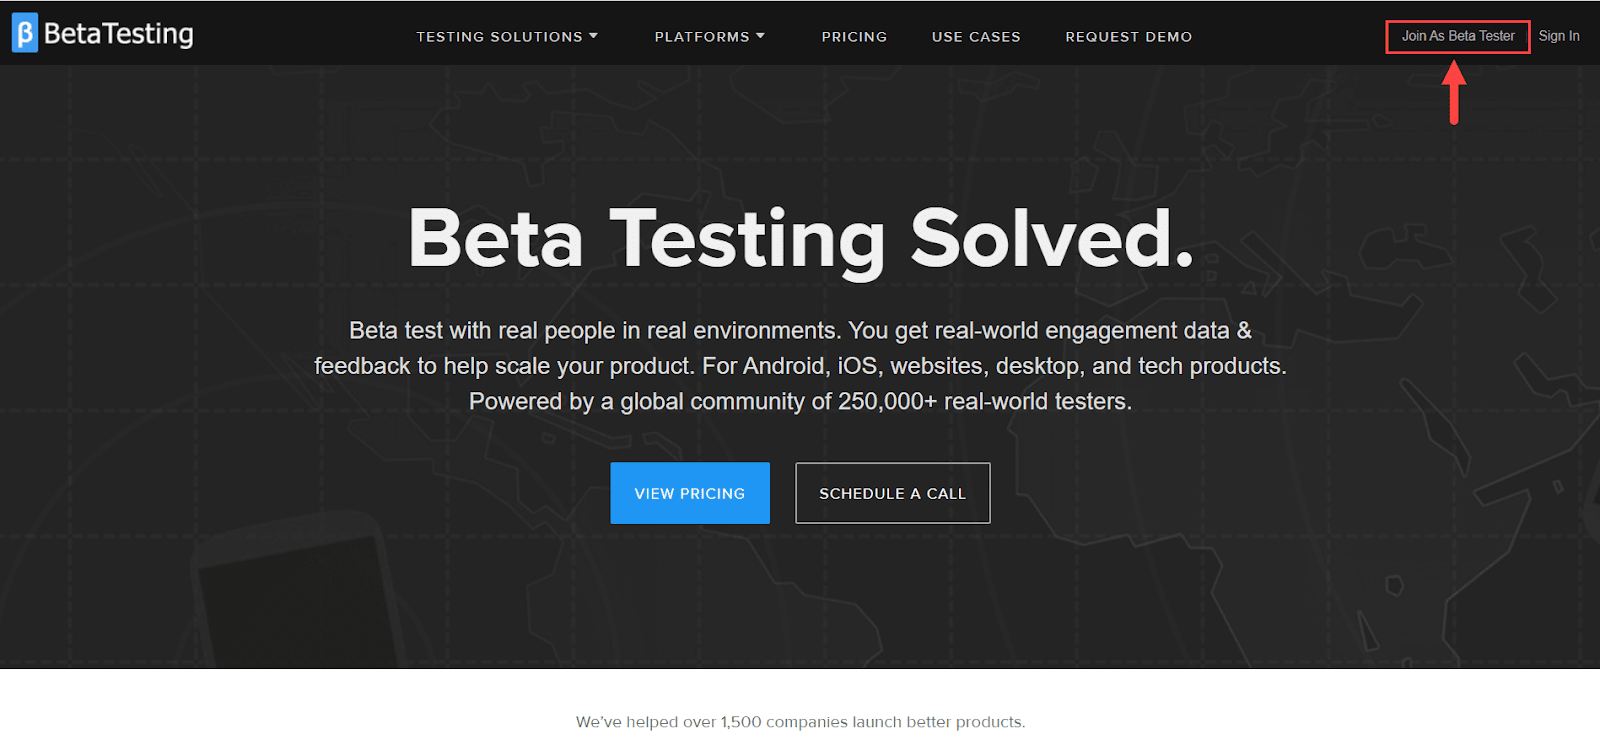 Betatesting.com provides real-world engagement data to help companies scale their products